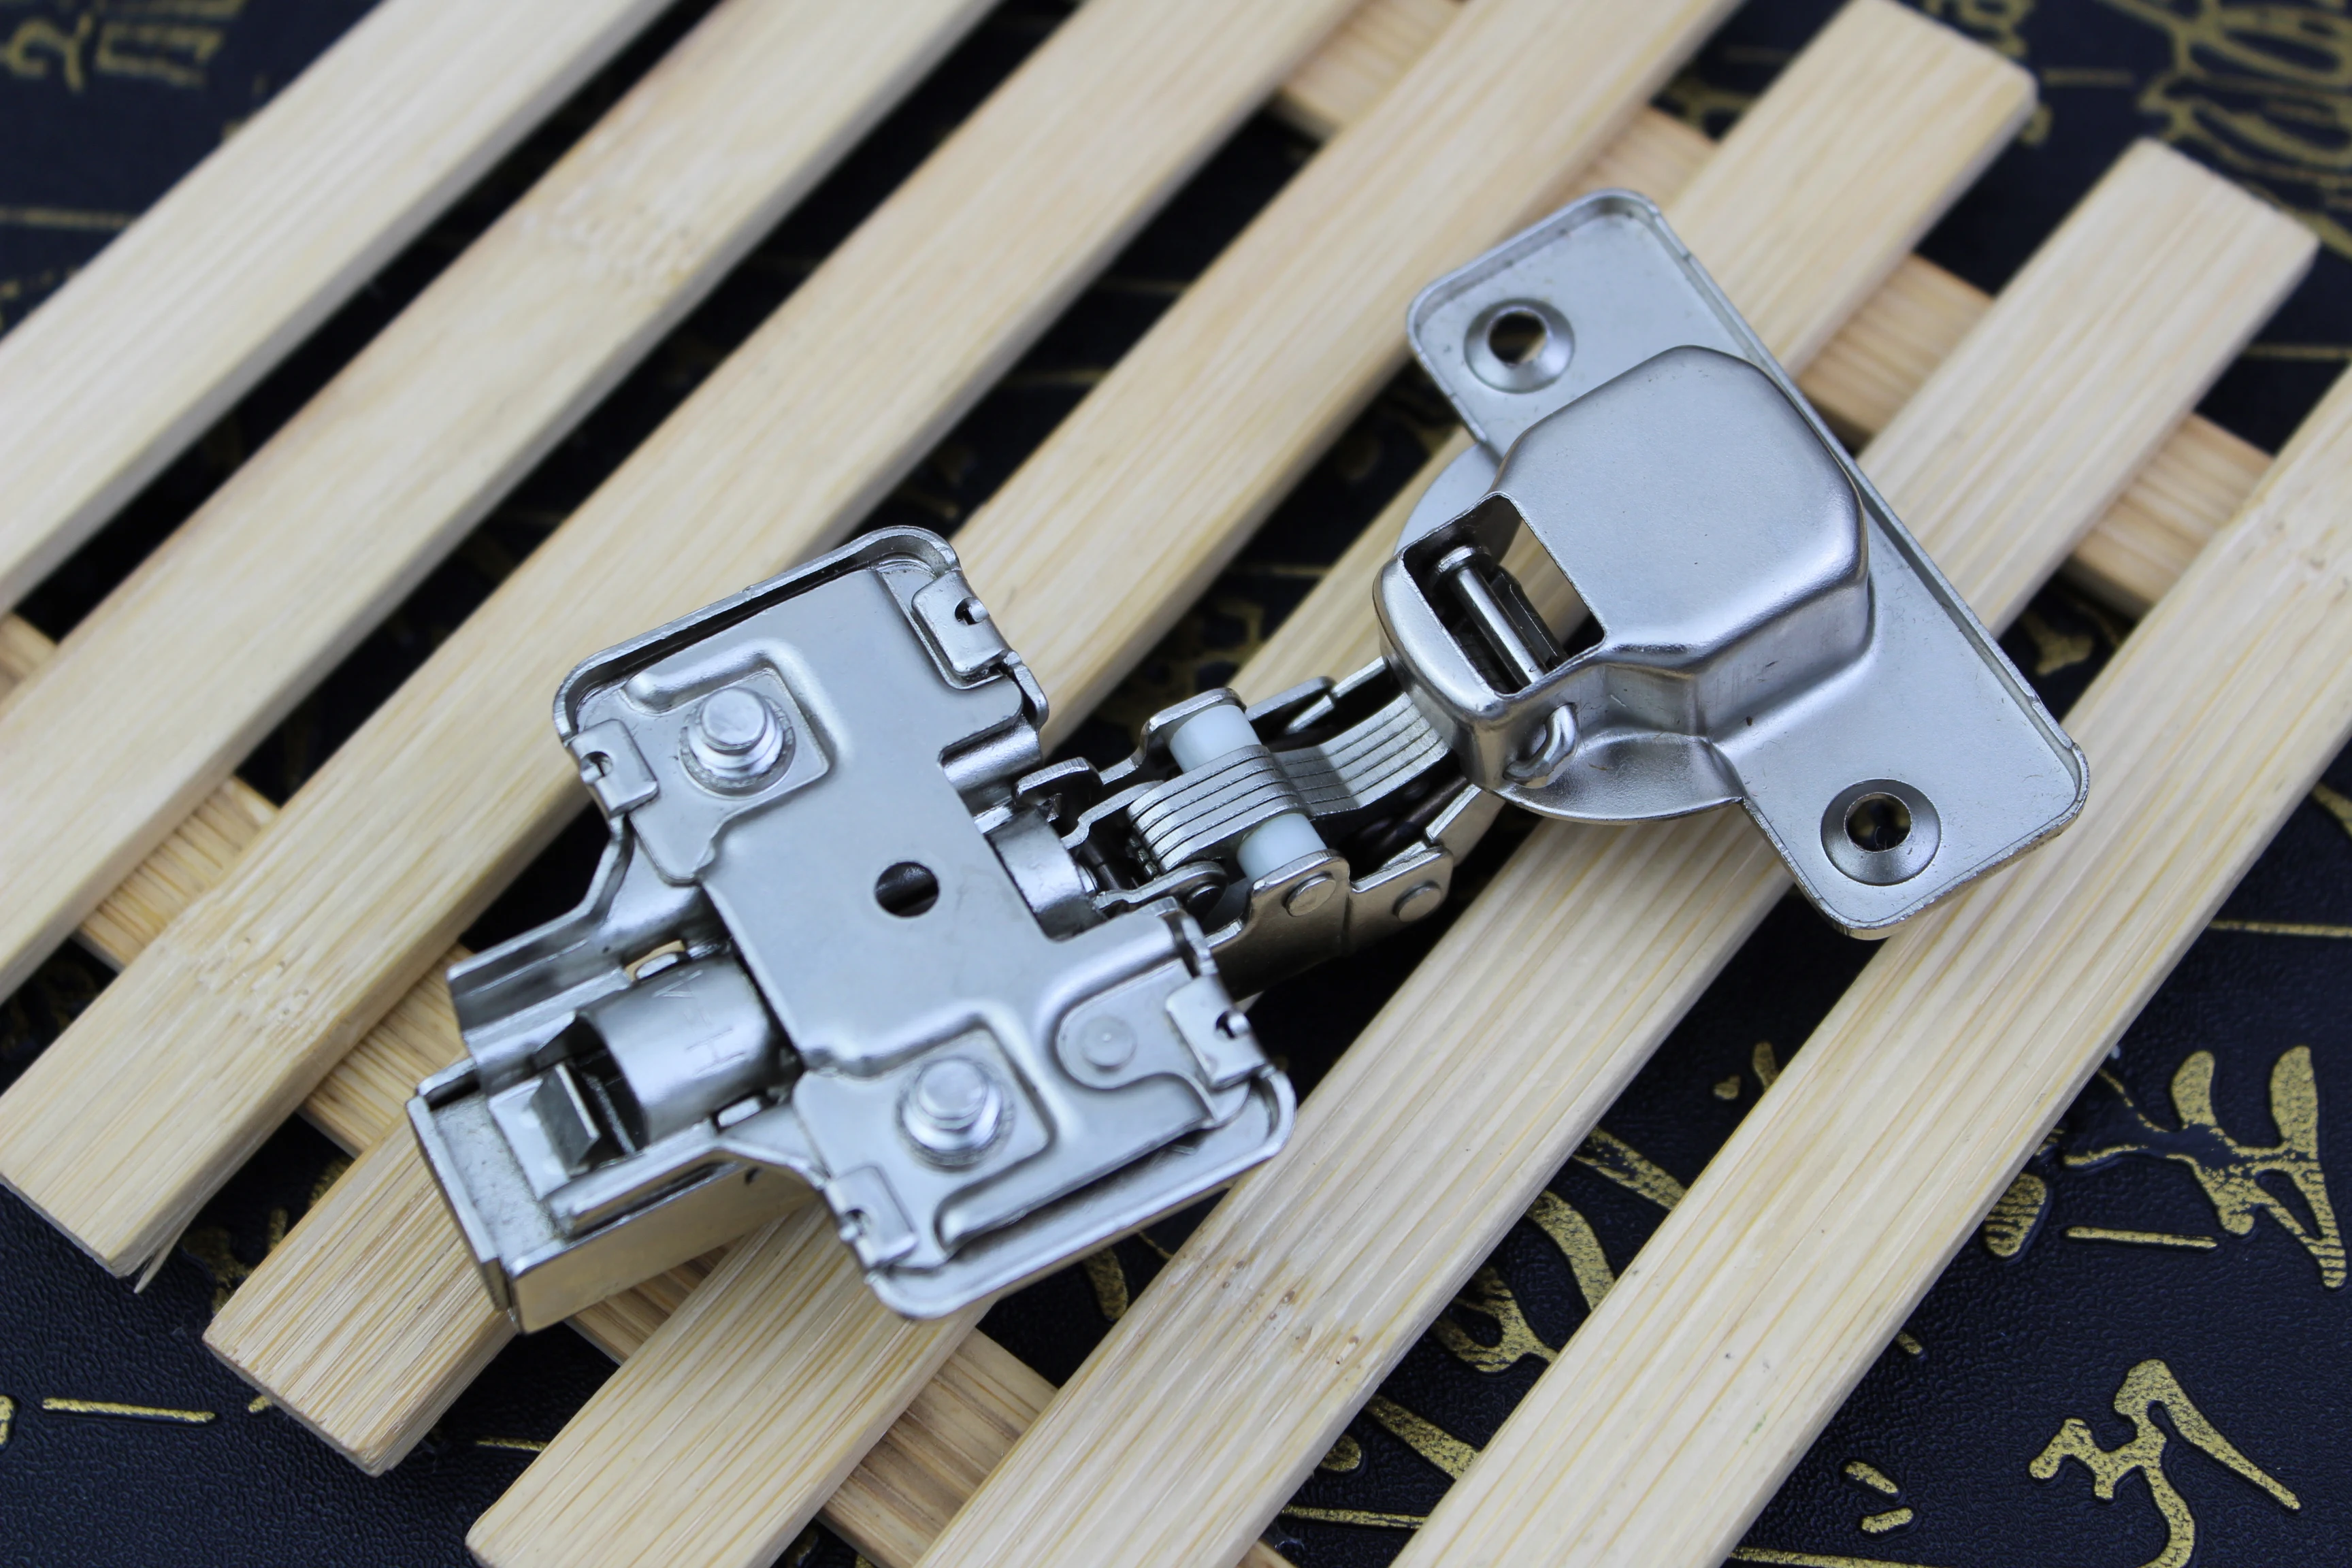 New arrivals cabinet concealed hinge automatic hinged kitchen cabinet